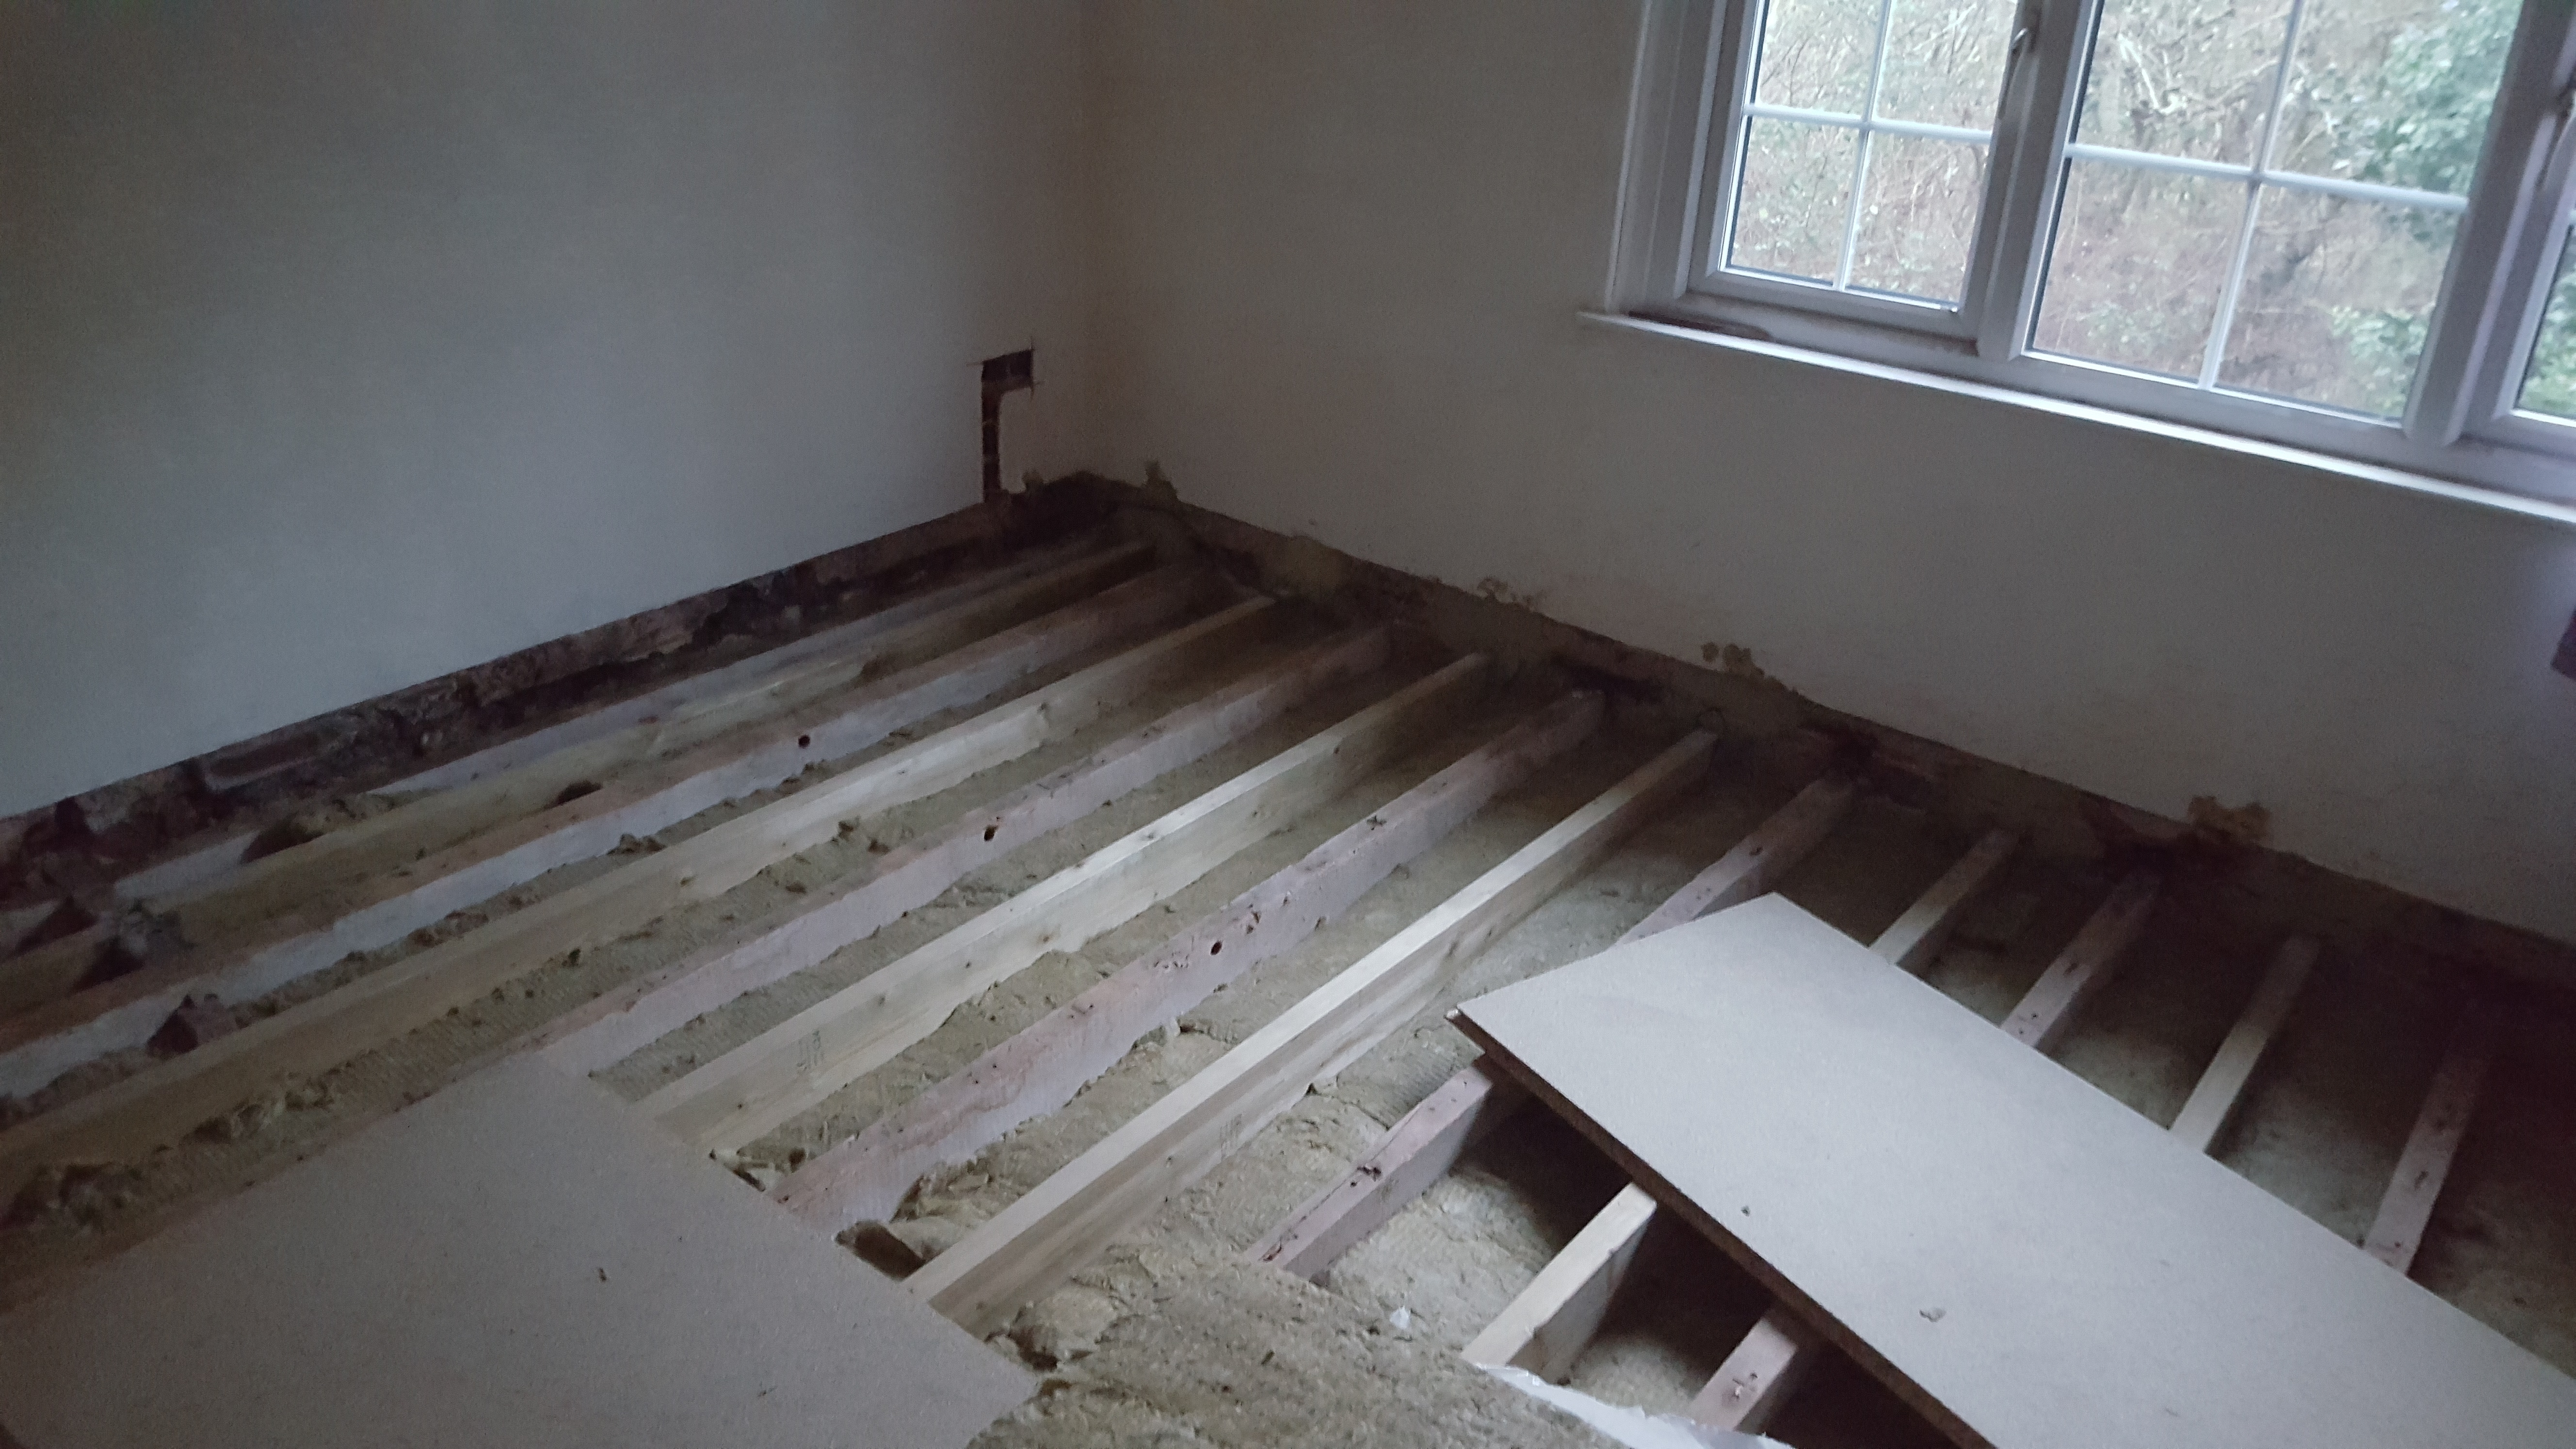 Strengthening And Levelling Wooden Floors In An 18th Century Property